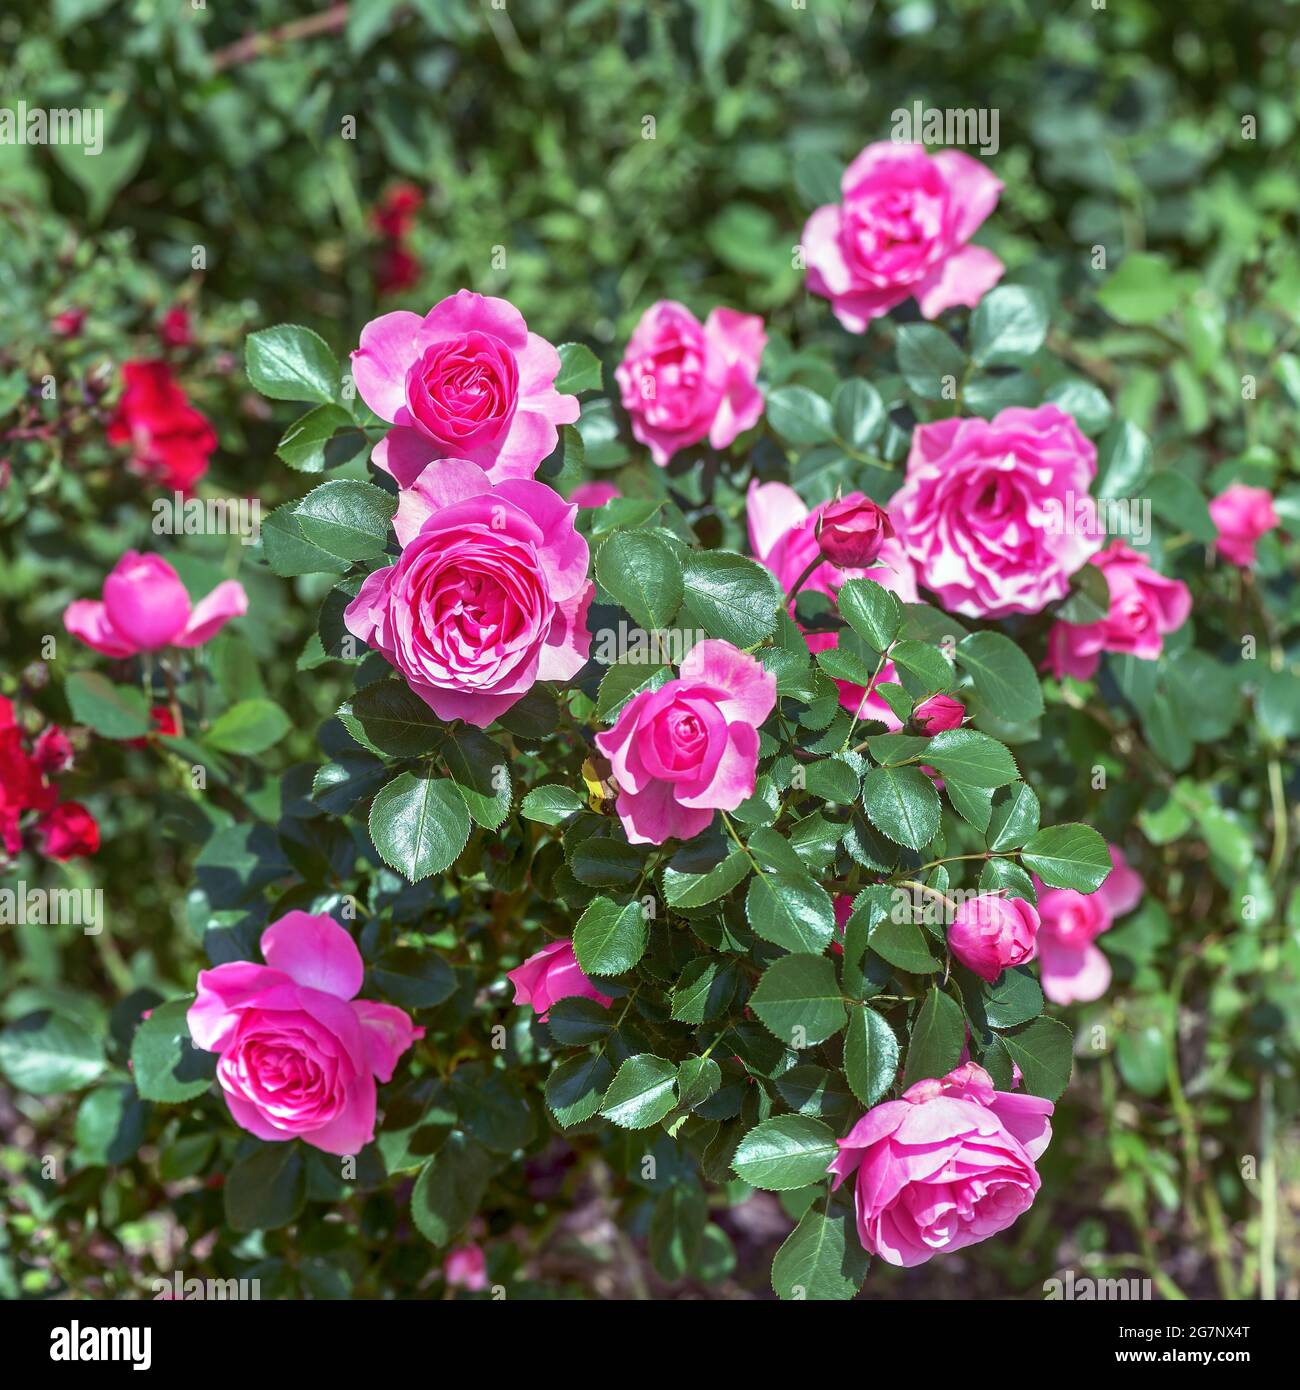 Standard rose 'Fiesta' - flowers are densely double, large (6-8 cm in diameter), slightly fragrant and painted in a deep pink or terracotta color. Stock Photo